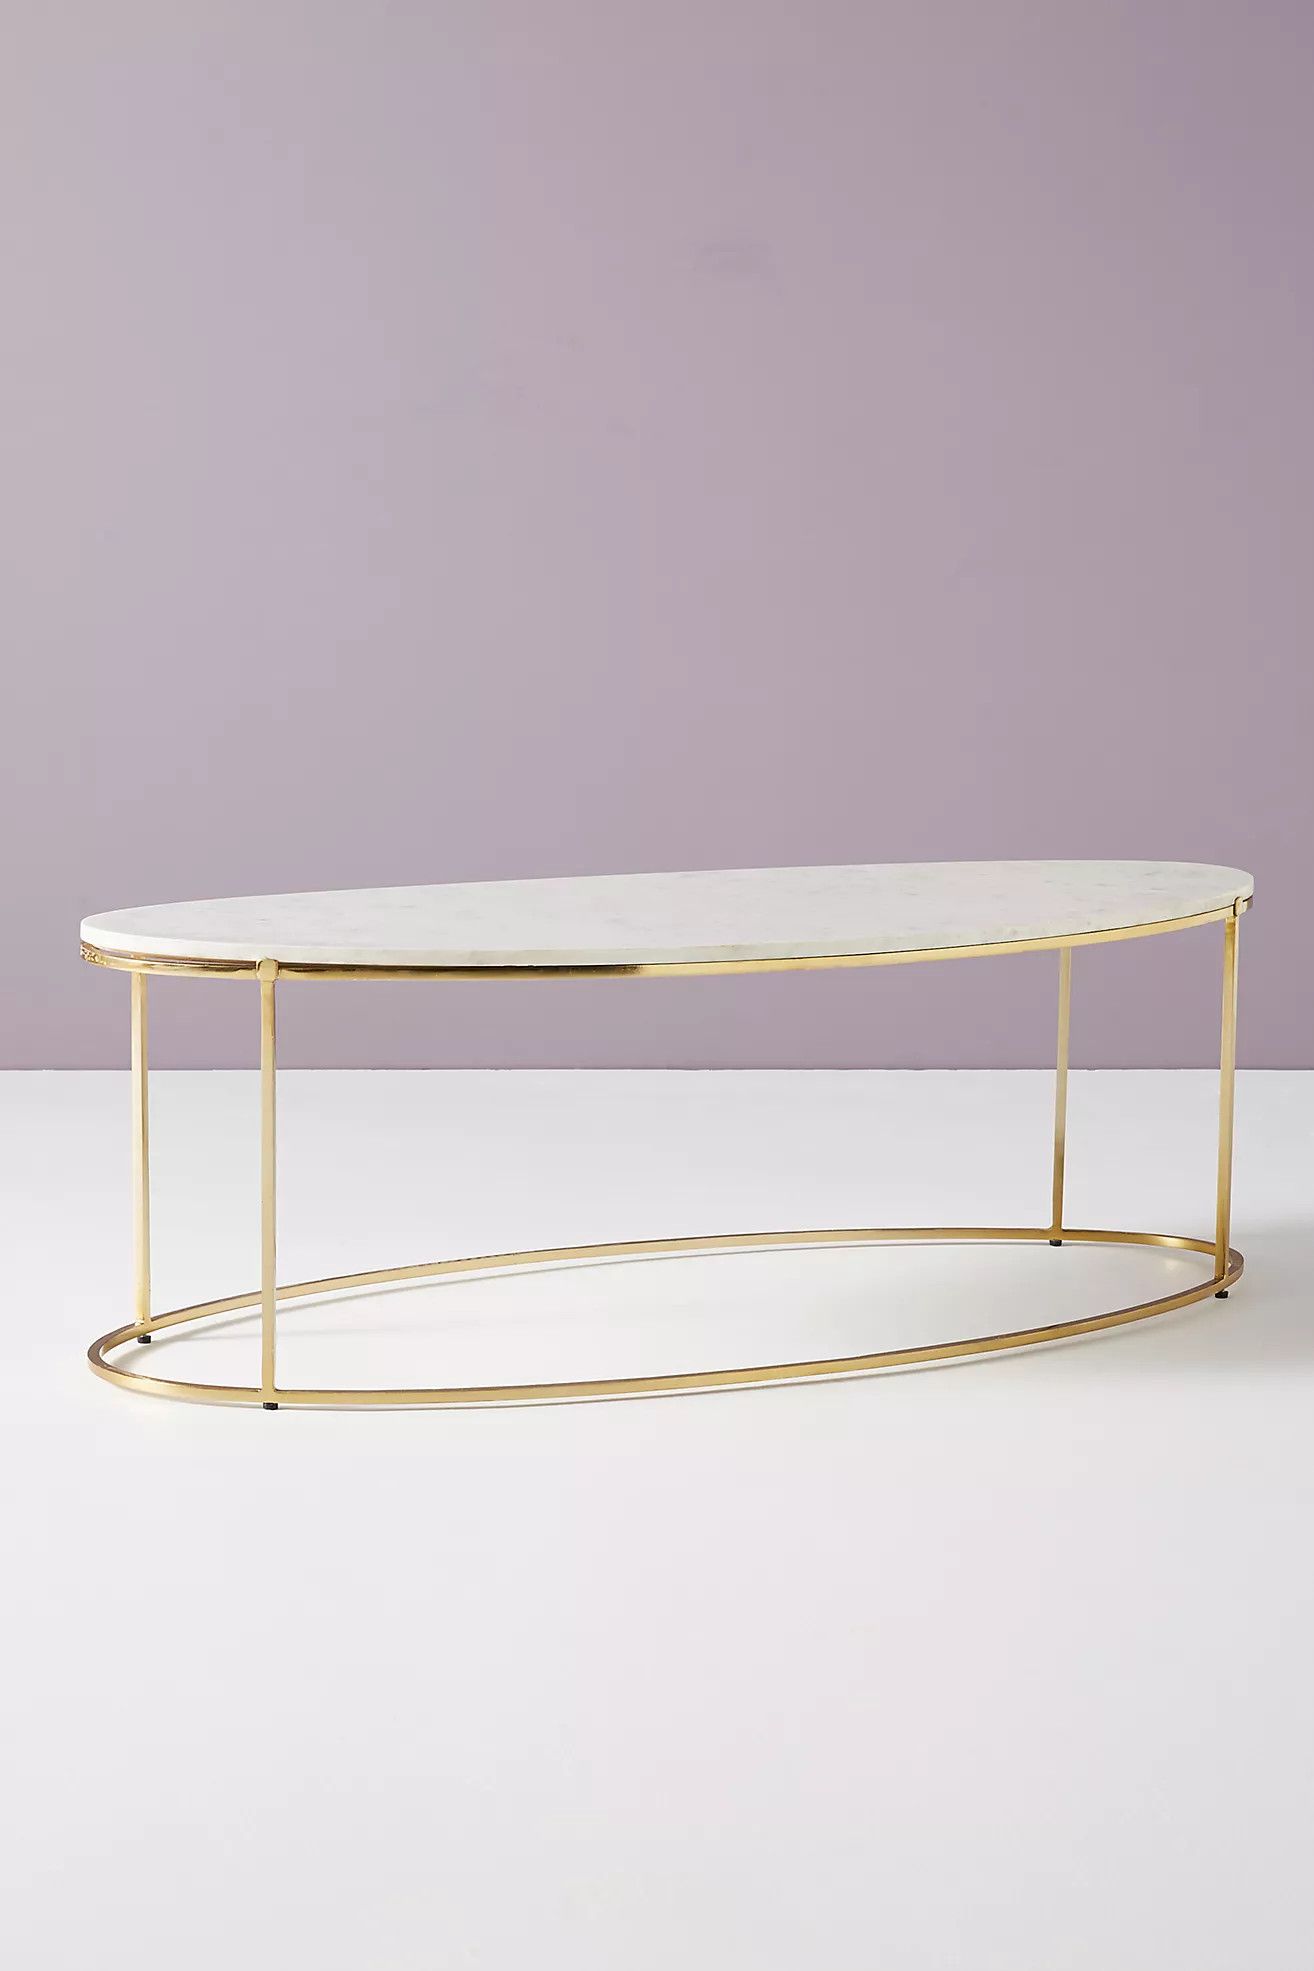 Anthropologie - Coffee Table | Anthropologie (US)